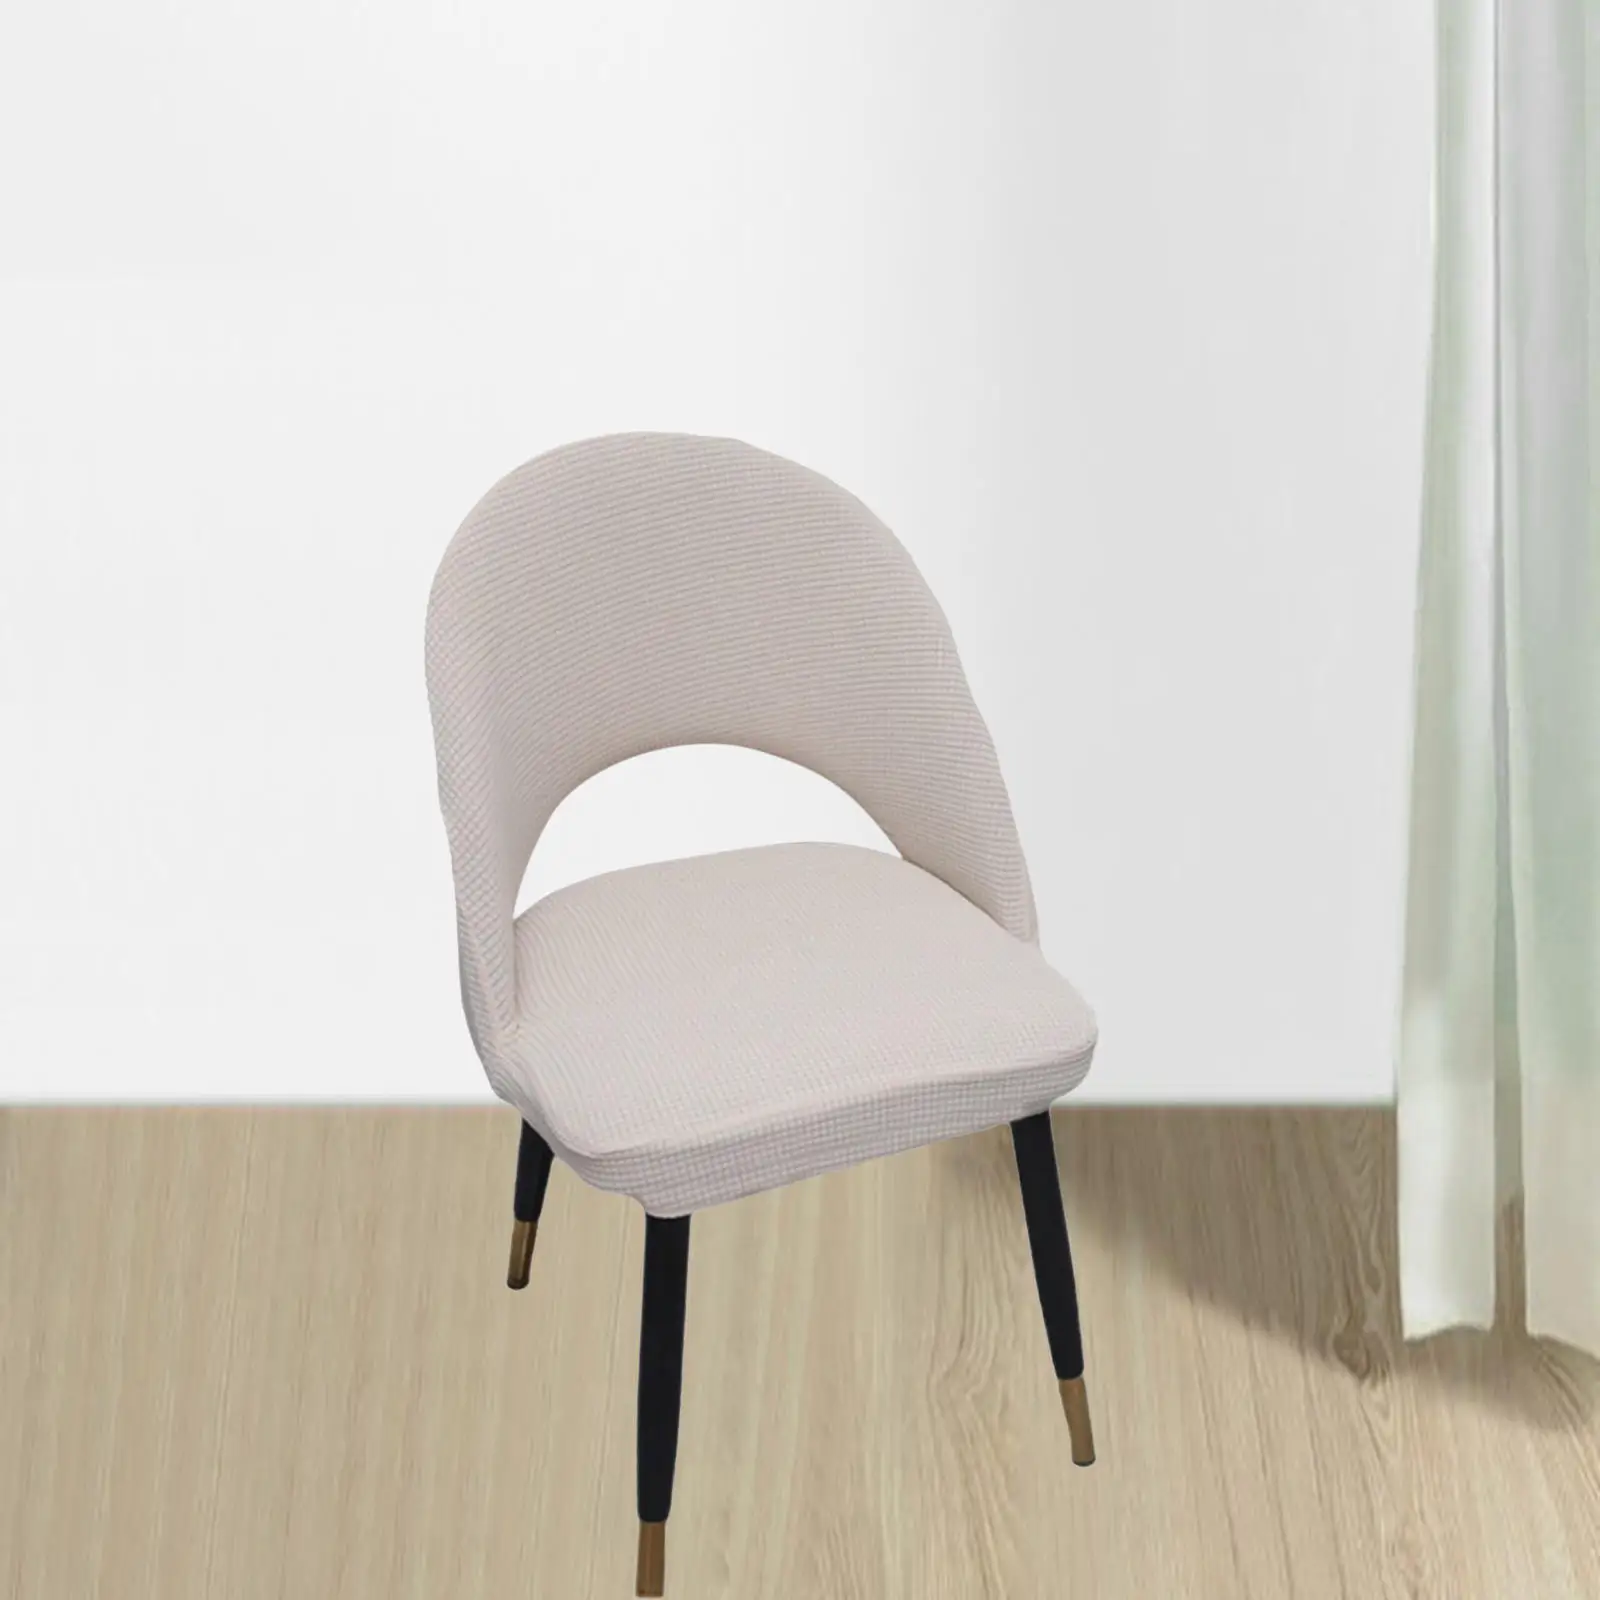 Soft Jacquard Short Back Curved Chair Cover Anti-Slip High Stretch Dinners Ceremonies Hotel Arc Hollow Back Chair Slipcover